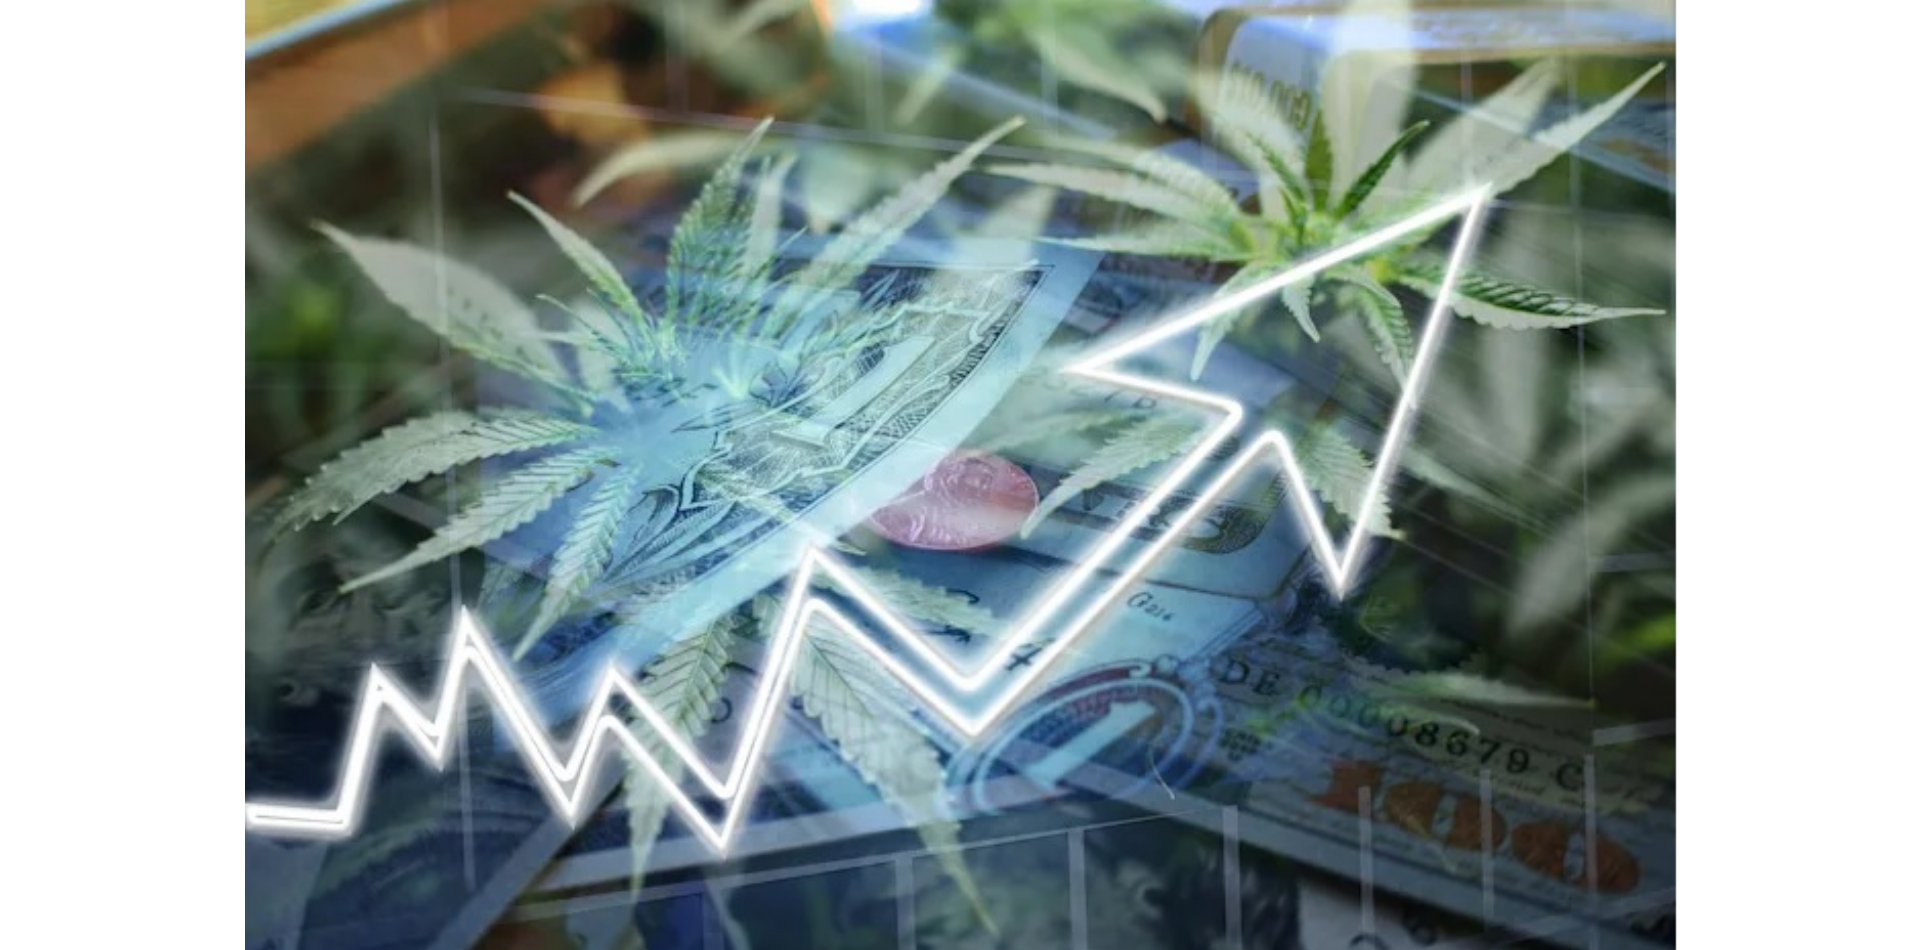 UK to see largest medical cannabis market growth in Europe 2020 to 2025